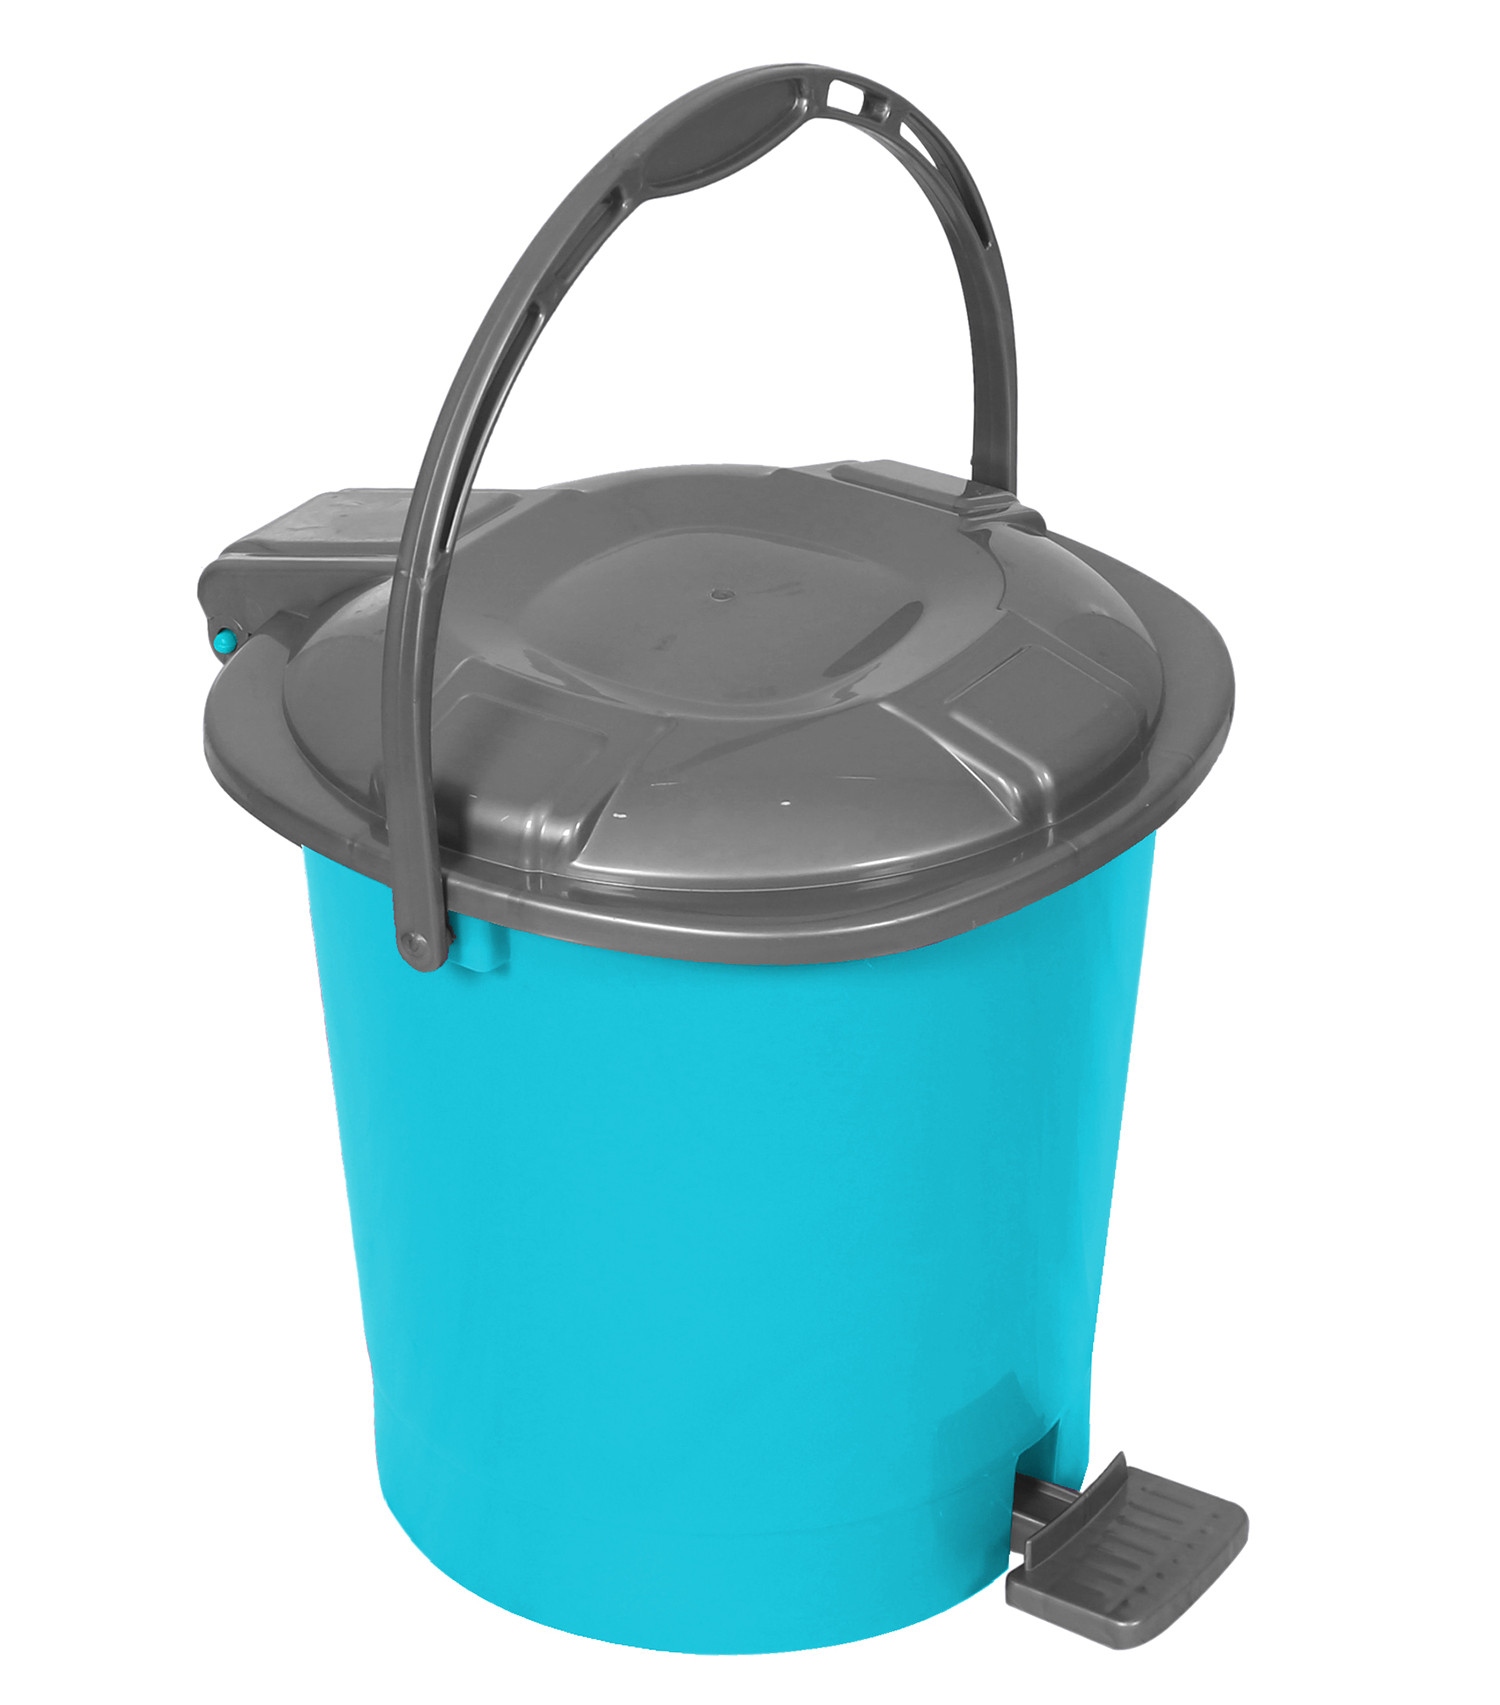 Kuber Industries Durable Plastic Pedal Dustbin|Waste Bin|Trash Can For Kitchen & Home With Handle,10 Litre,Pack of 2 (Sky Blue)